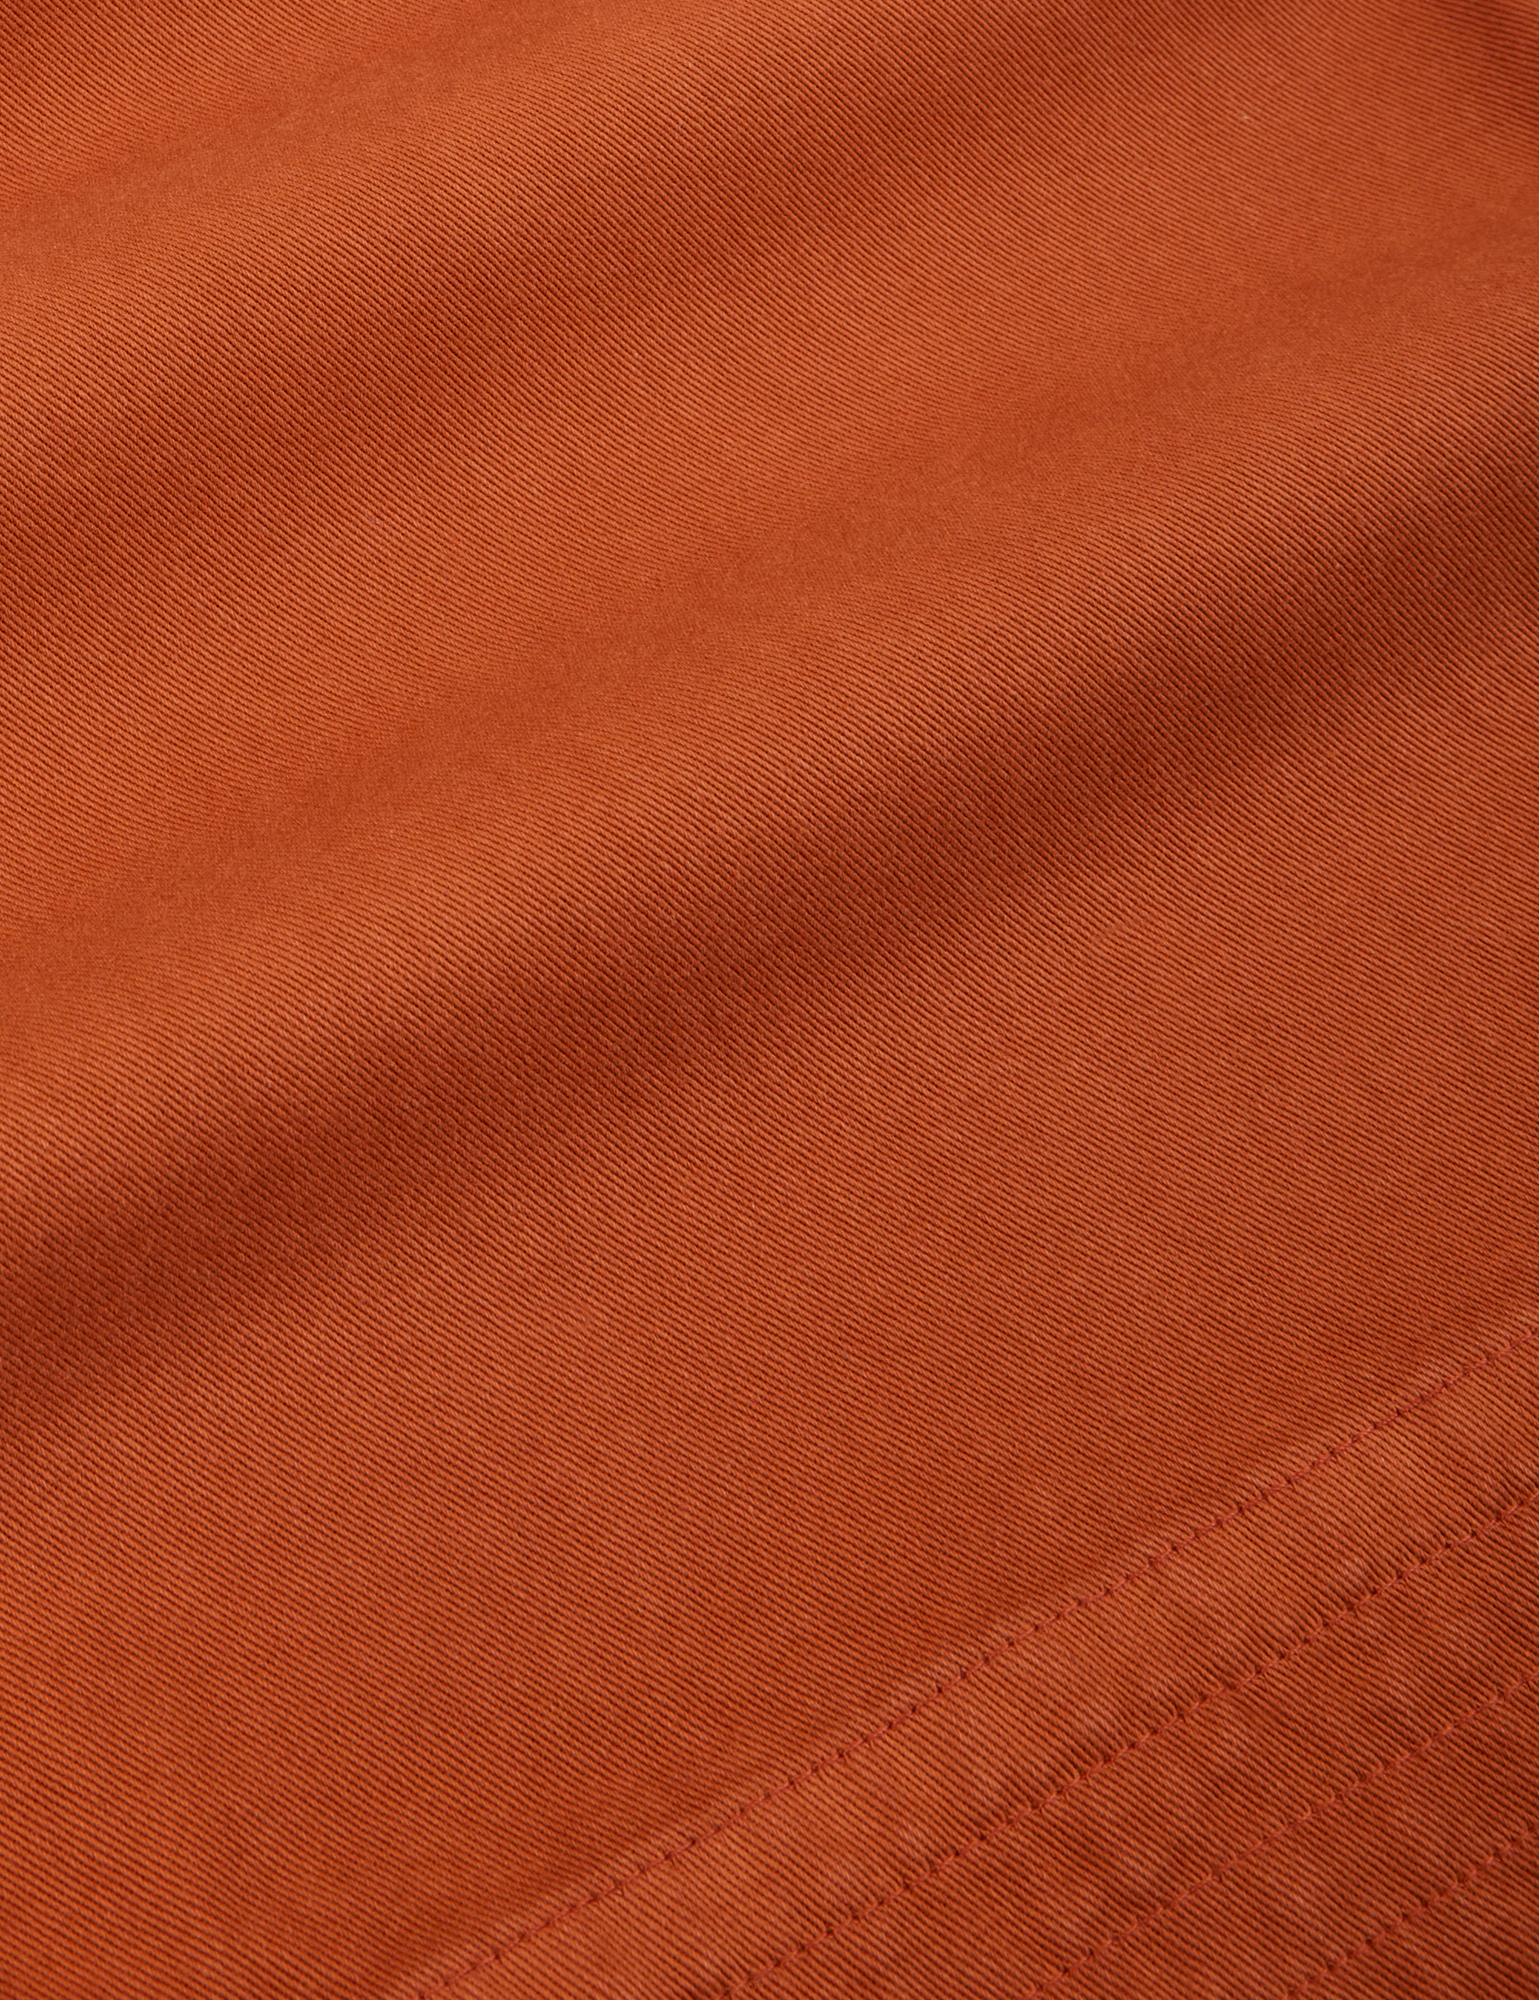 Action Pants in Burnt Terracotta fabric detail close up